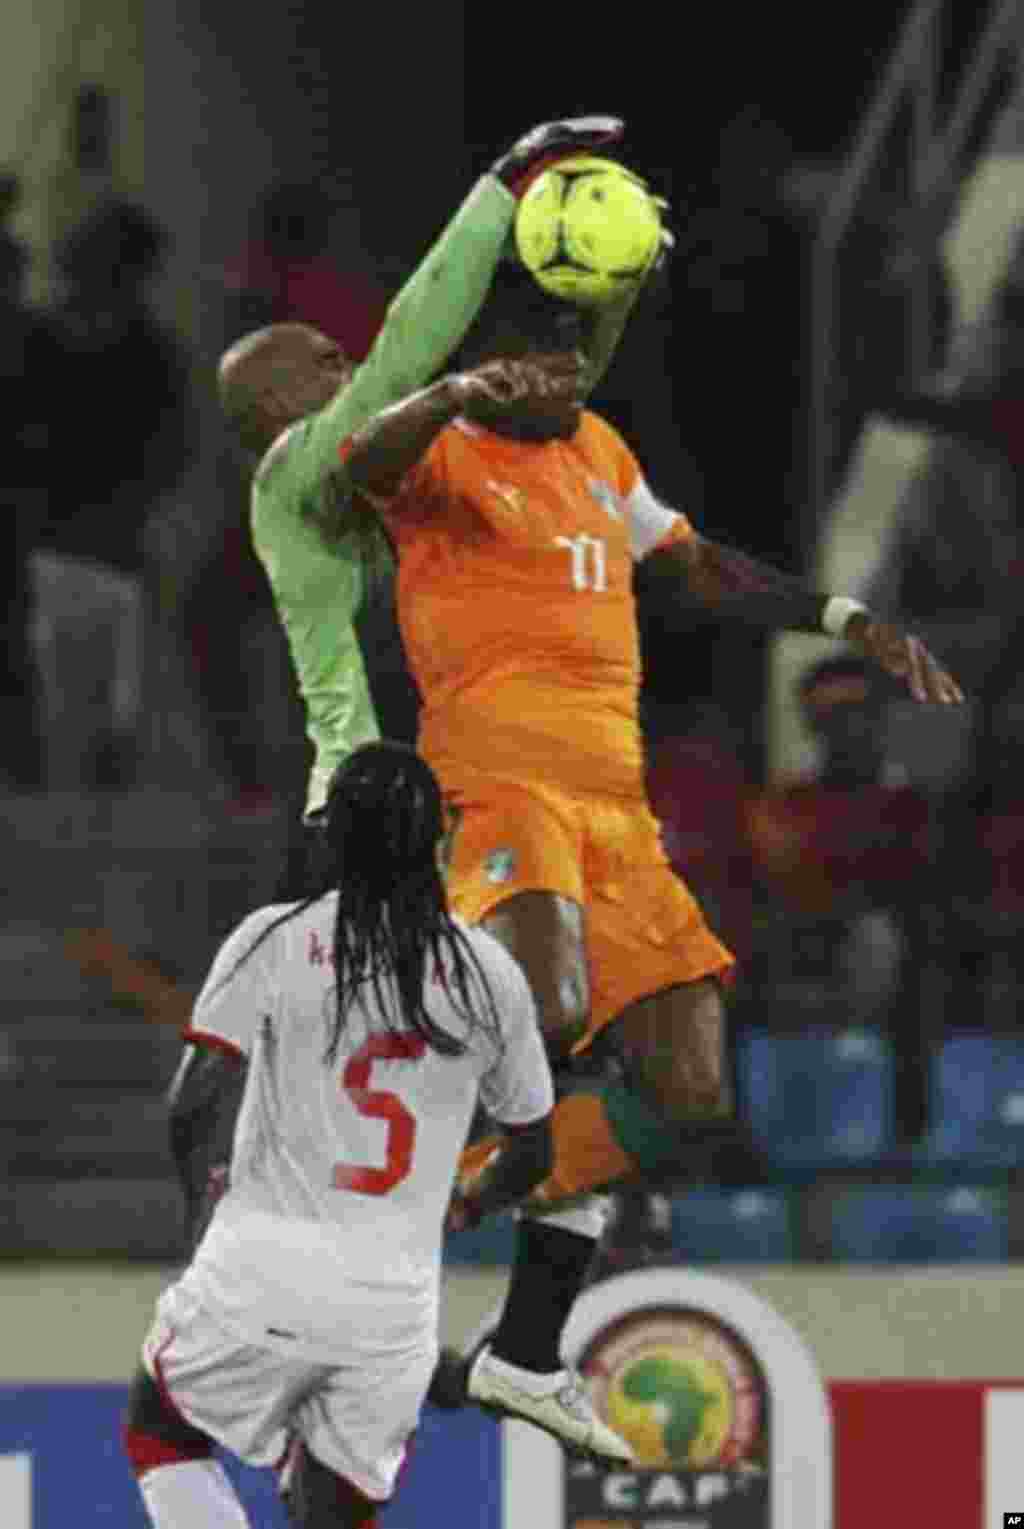 Didier Drogba (R) of Ivory Coast fights for the ball with Danilo of Equatorial Guinea (L) during their quarter-final match at the African Nations Cup soccer tournament in Malabo February 4, 2012